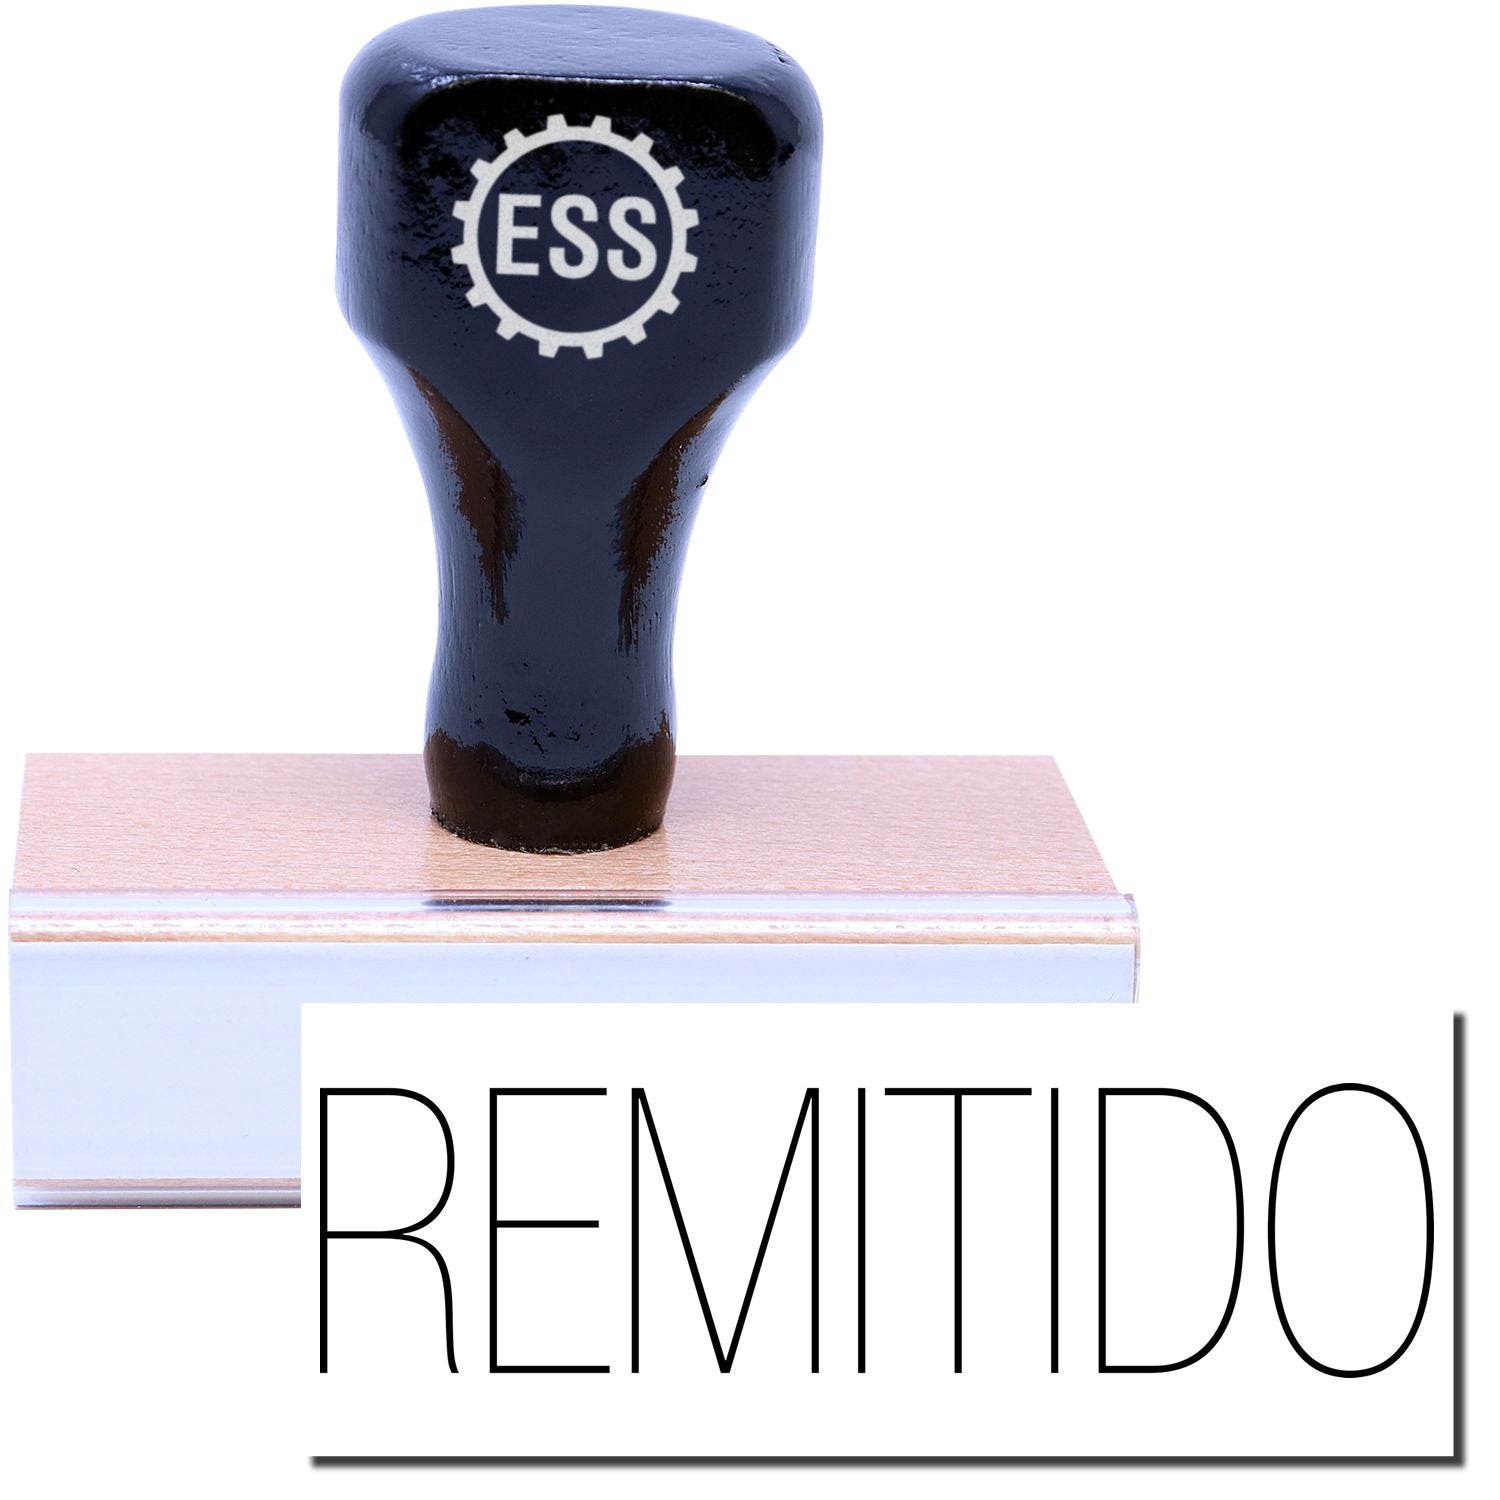 A stock office rubber stamp with a stamped image showing how the text "REMITIDO" is displayed after stamping.